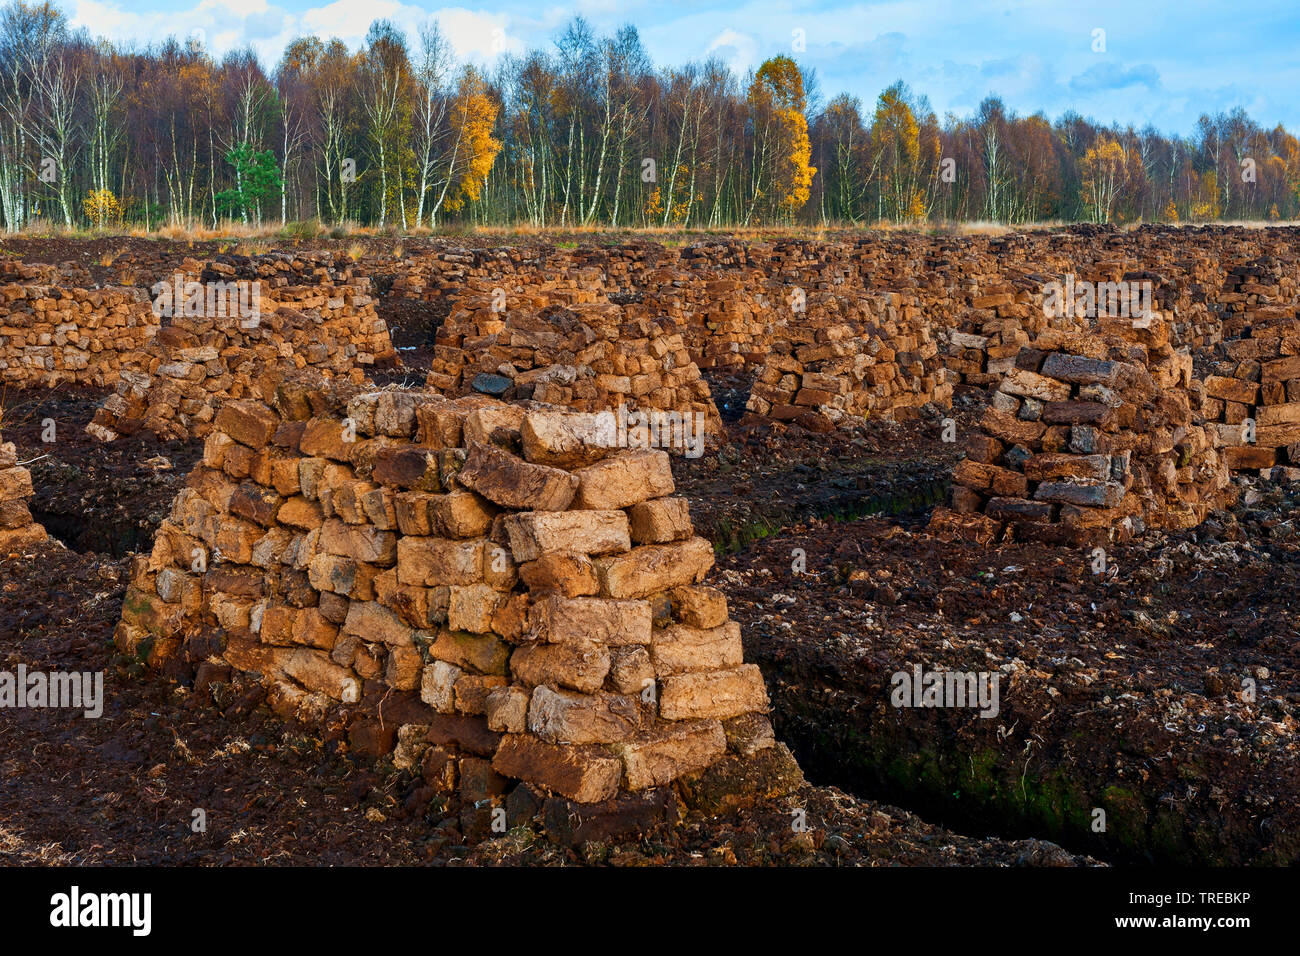 cutting peat in mire Goldenstedter Moor, Germany, Lower Saxony, Goldenstedter Moor Stock Photo